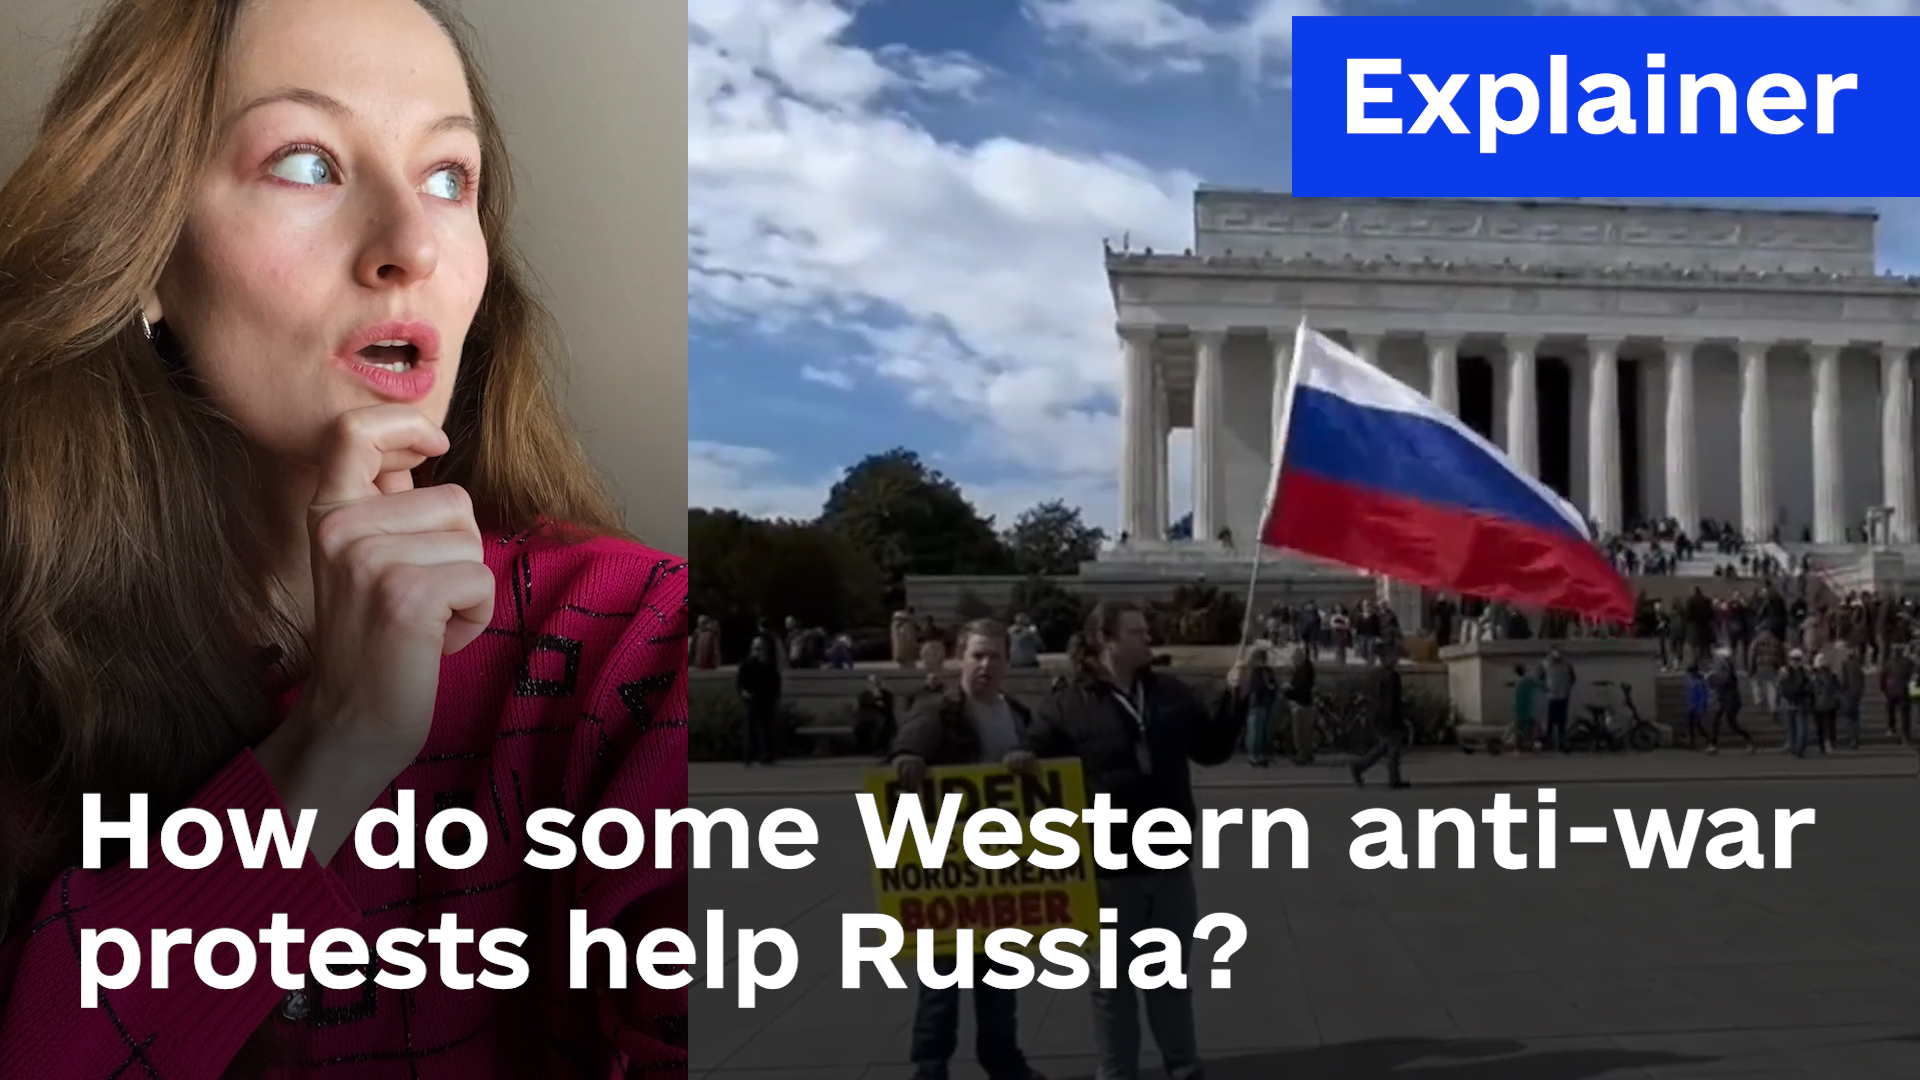 Explainer: How do some Western anti-war protests help Russia? (VIDEO)